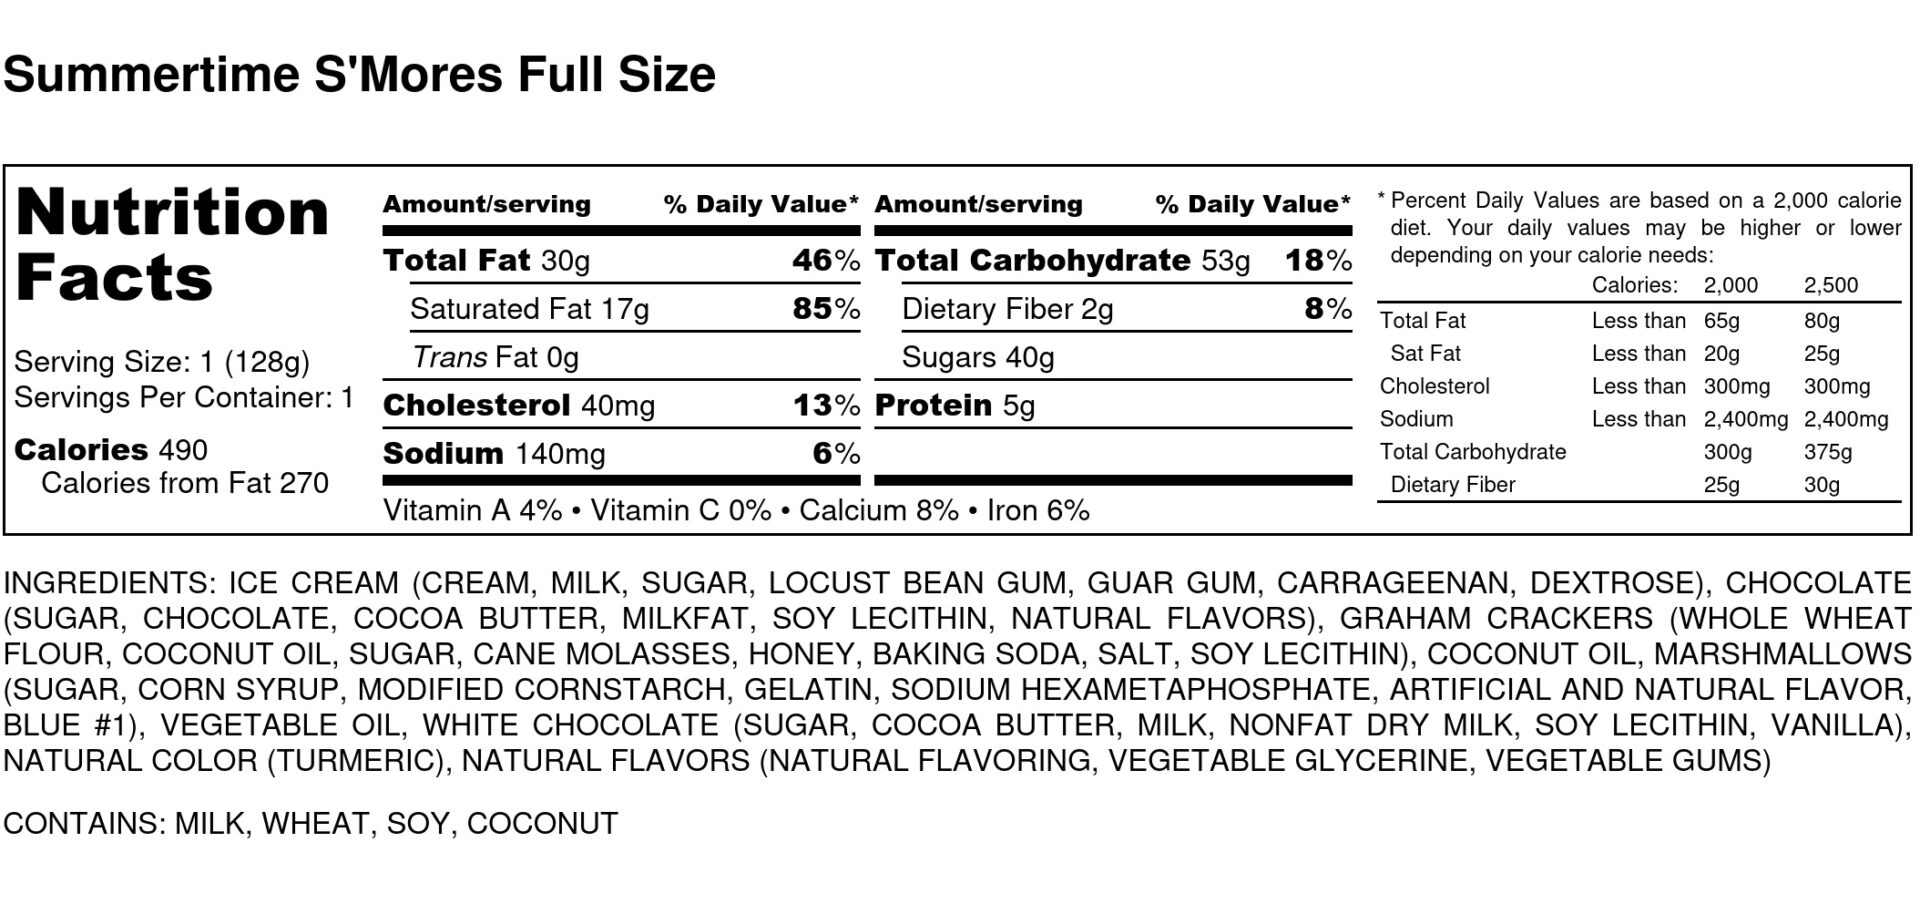 Summertime SMores Full Size Nutrition Label scaled